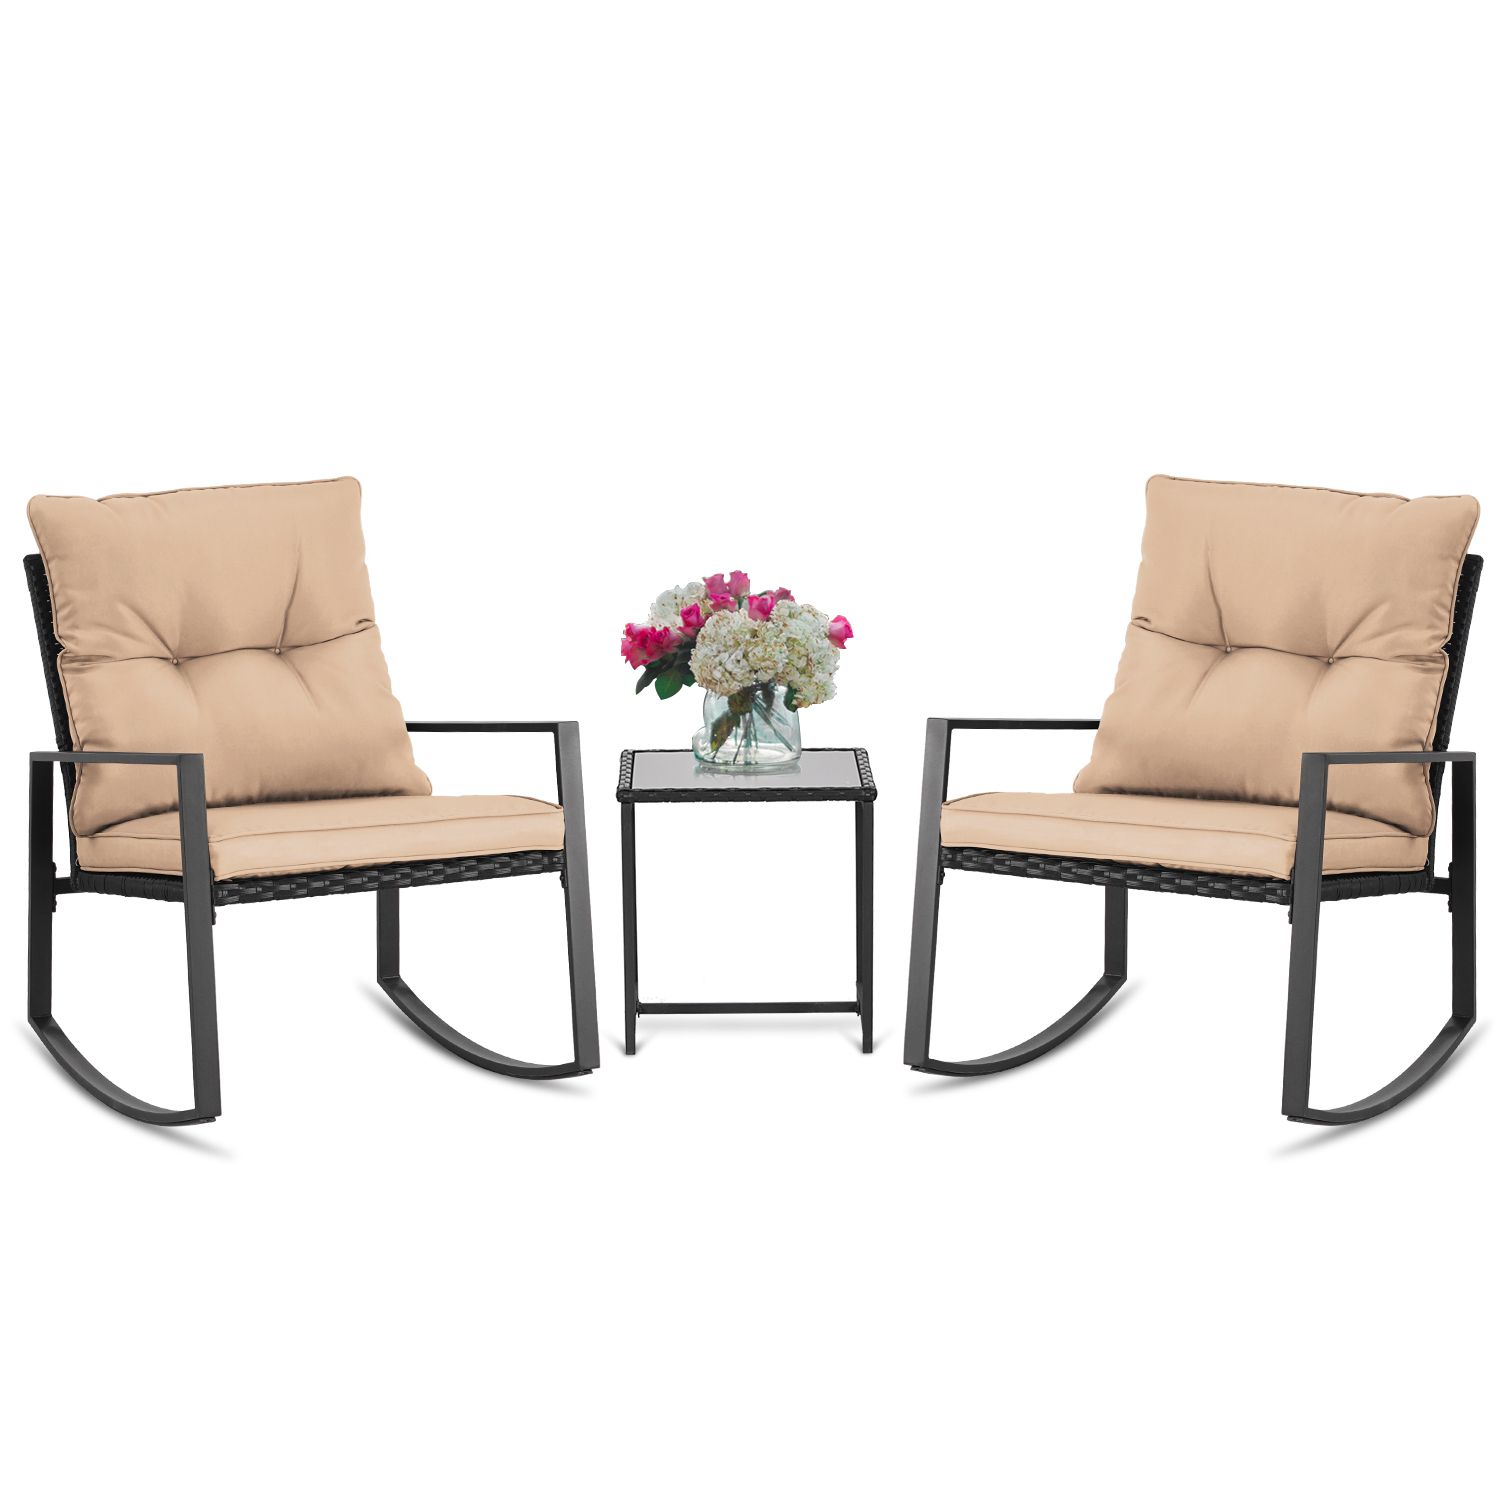 Trendy Outdoor Rocking Chair Sets With Coffee Table Regarding Suncrown Outdoor Patio Rocking Chair Bistro Set 3 Piece Black Wicker (View 5 of 15)